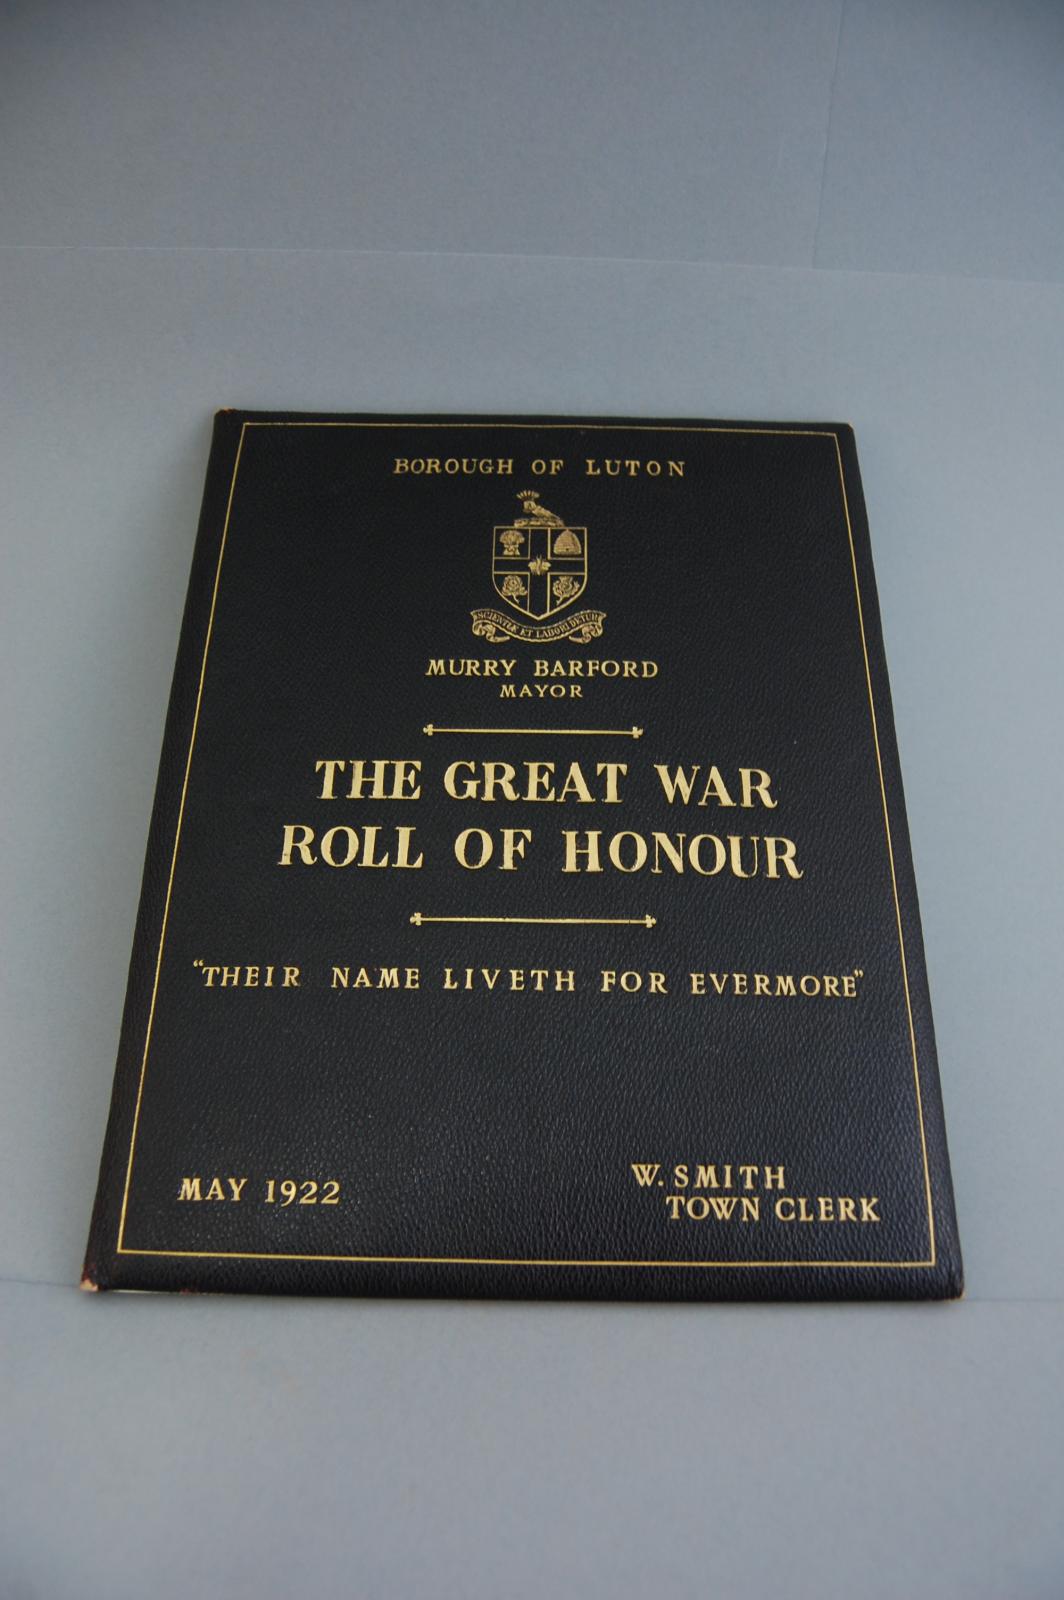 Front Cover of the Roll of Honour